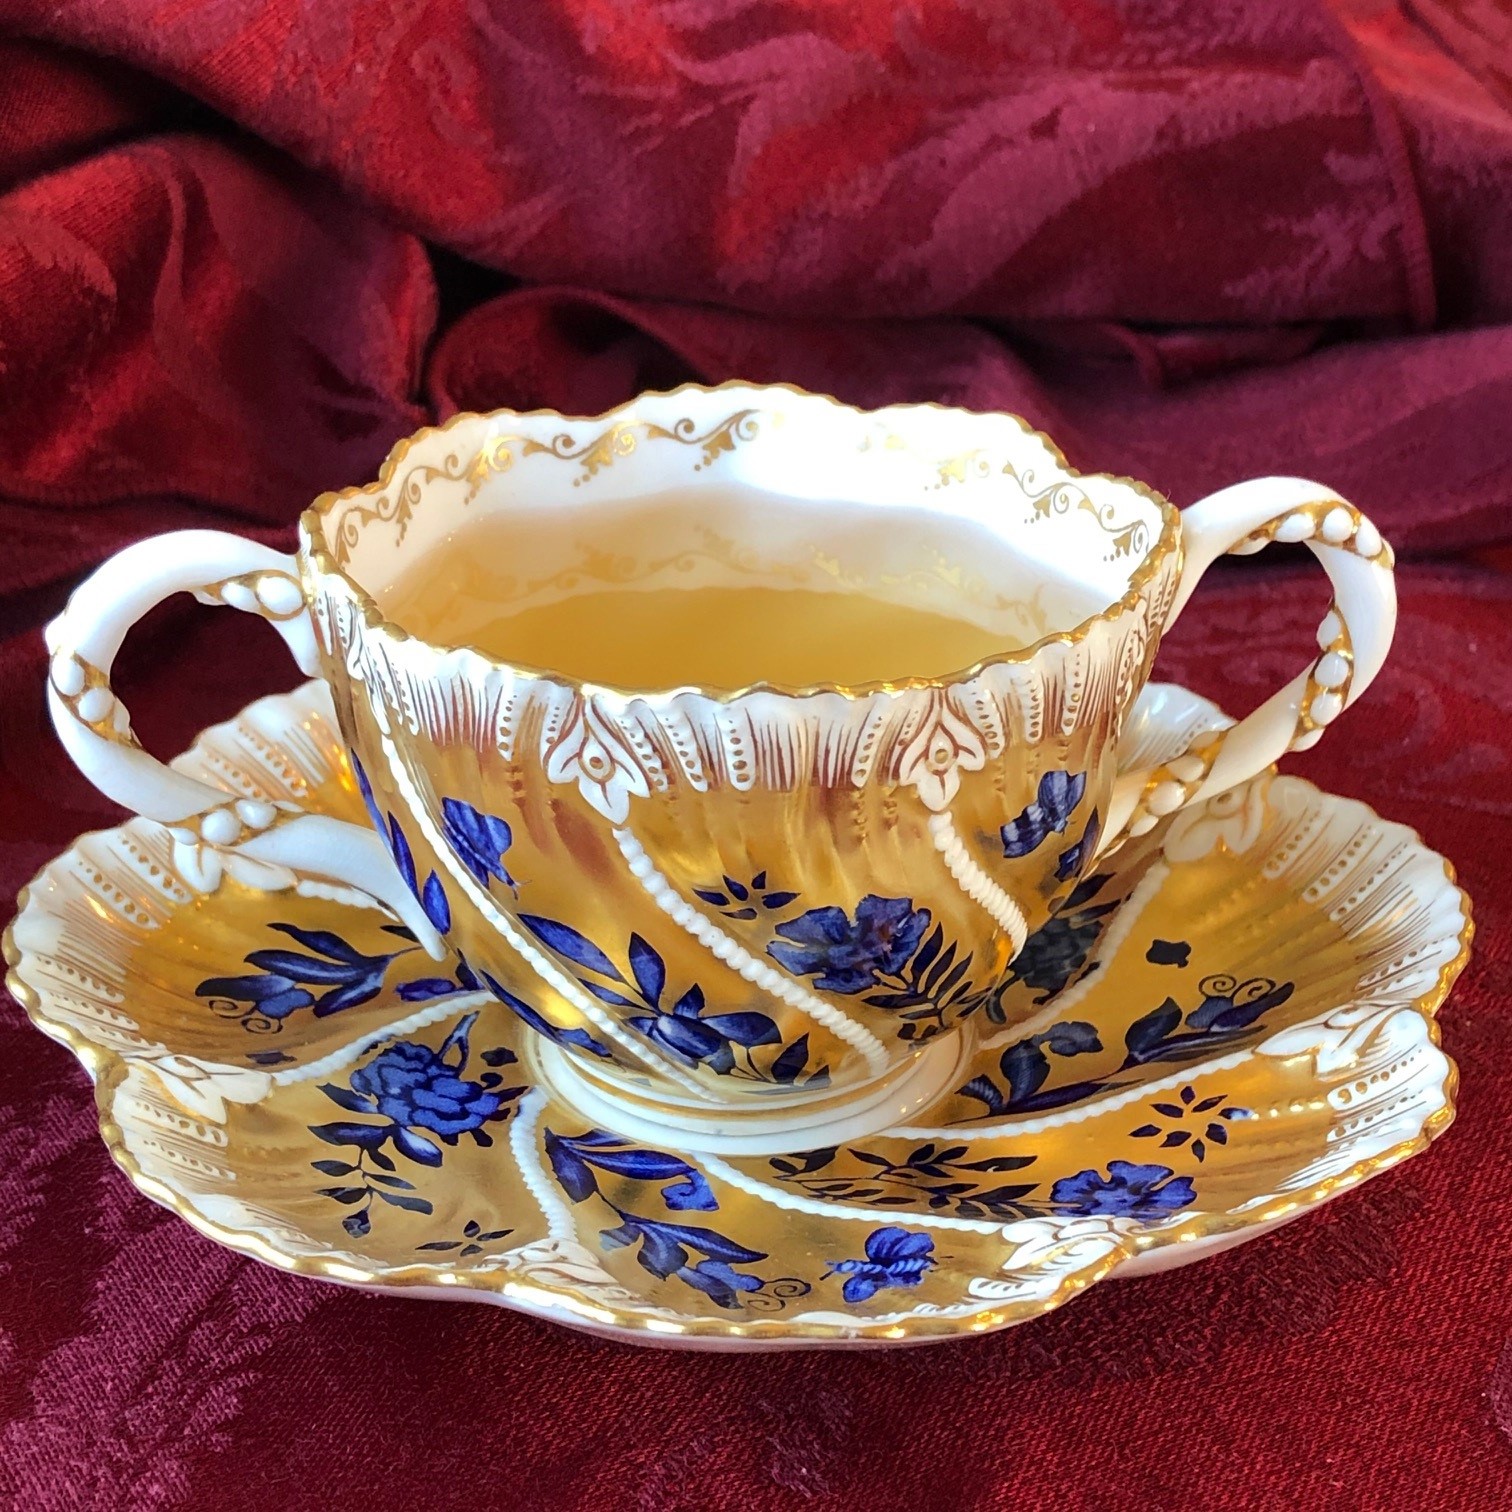 White and gold teacup with blue flowers on a crimson tablecloth. Traci's Sip & Listen story is about this teacup.